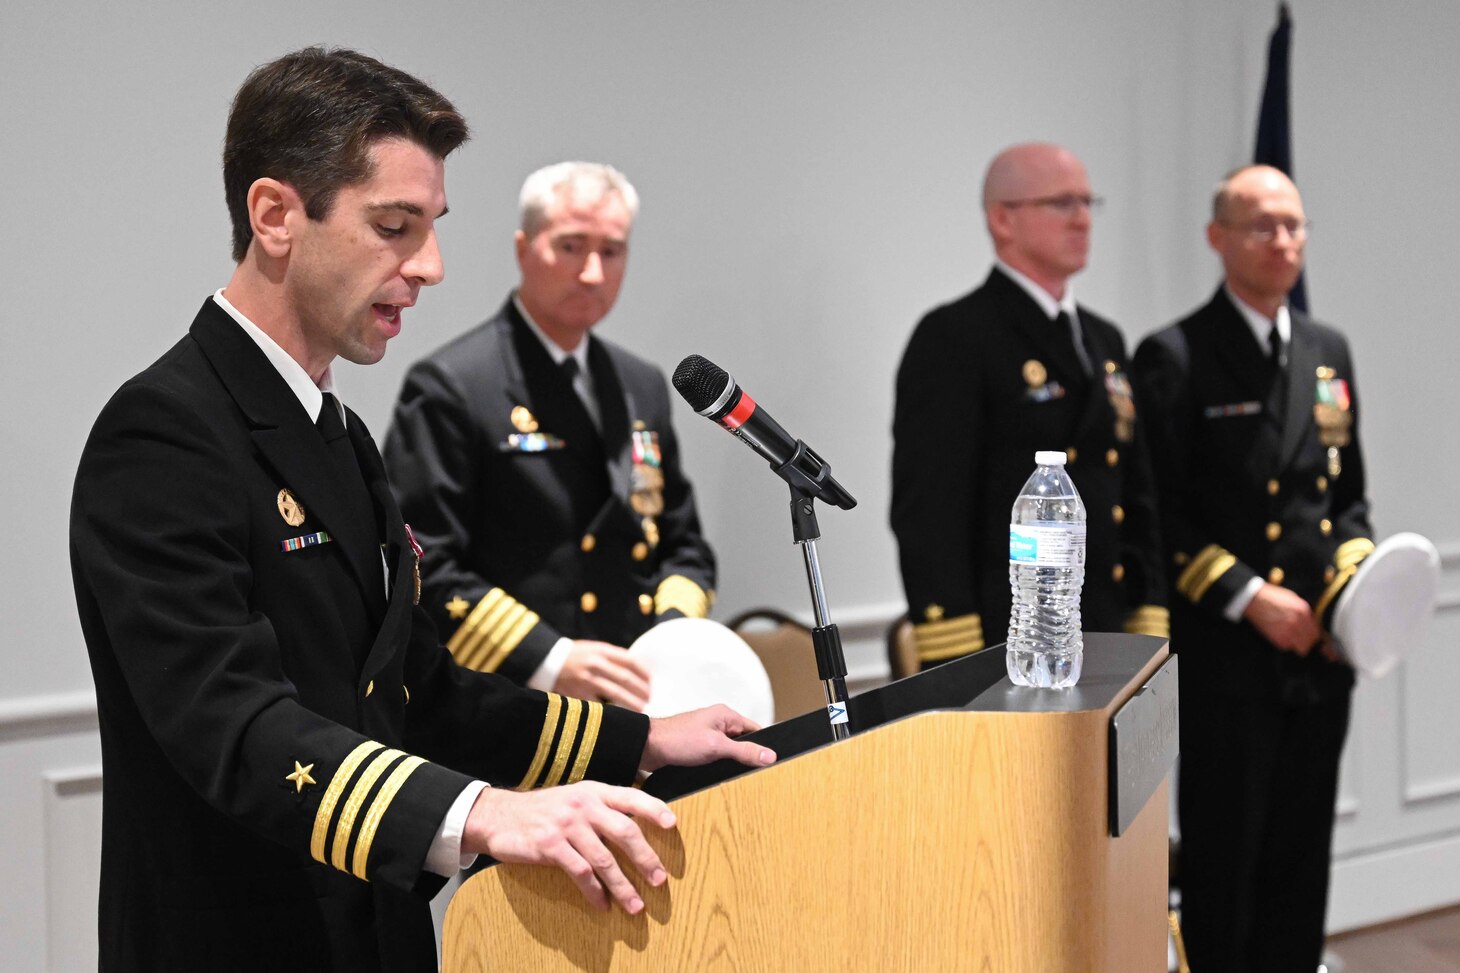 Cmdr. Matthew Brouillard, commanding officer of the Los Angeles-class fast-attack submarine USS Columbus (SSN 762), reads his orders during a change of command ceremony at the Mariner’s Museum and Park in Newport News, Virginia.